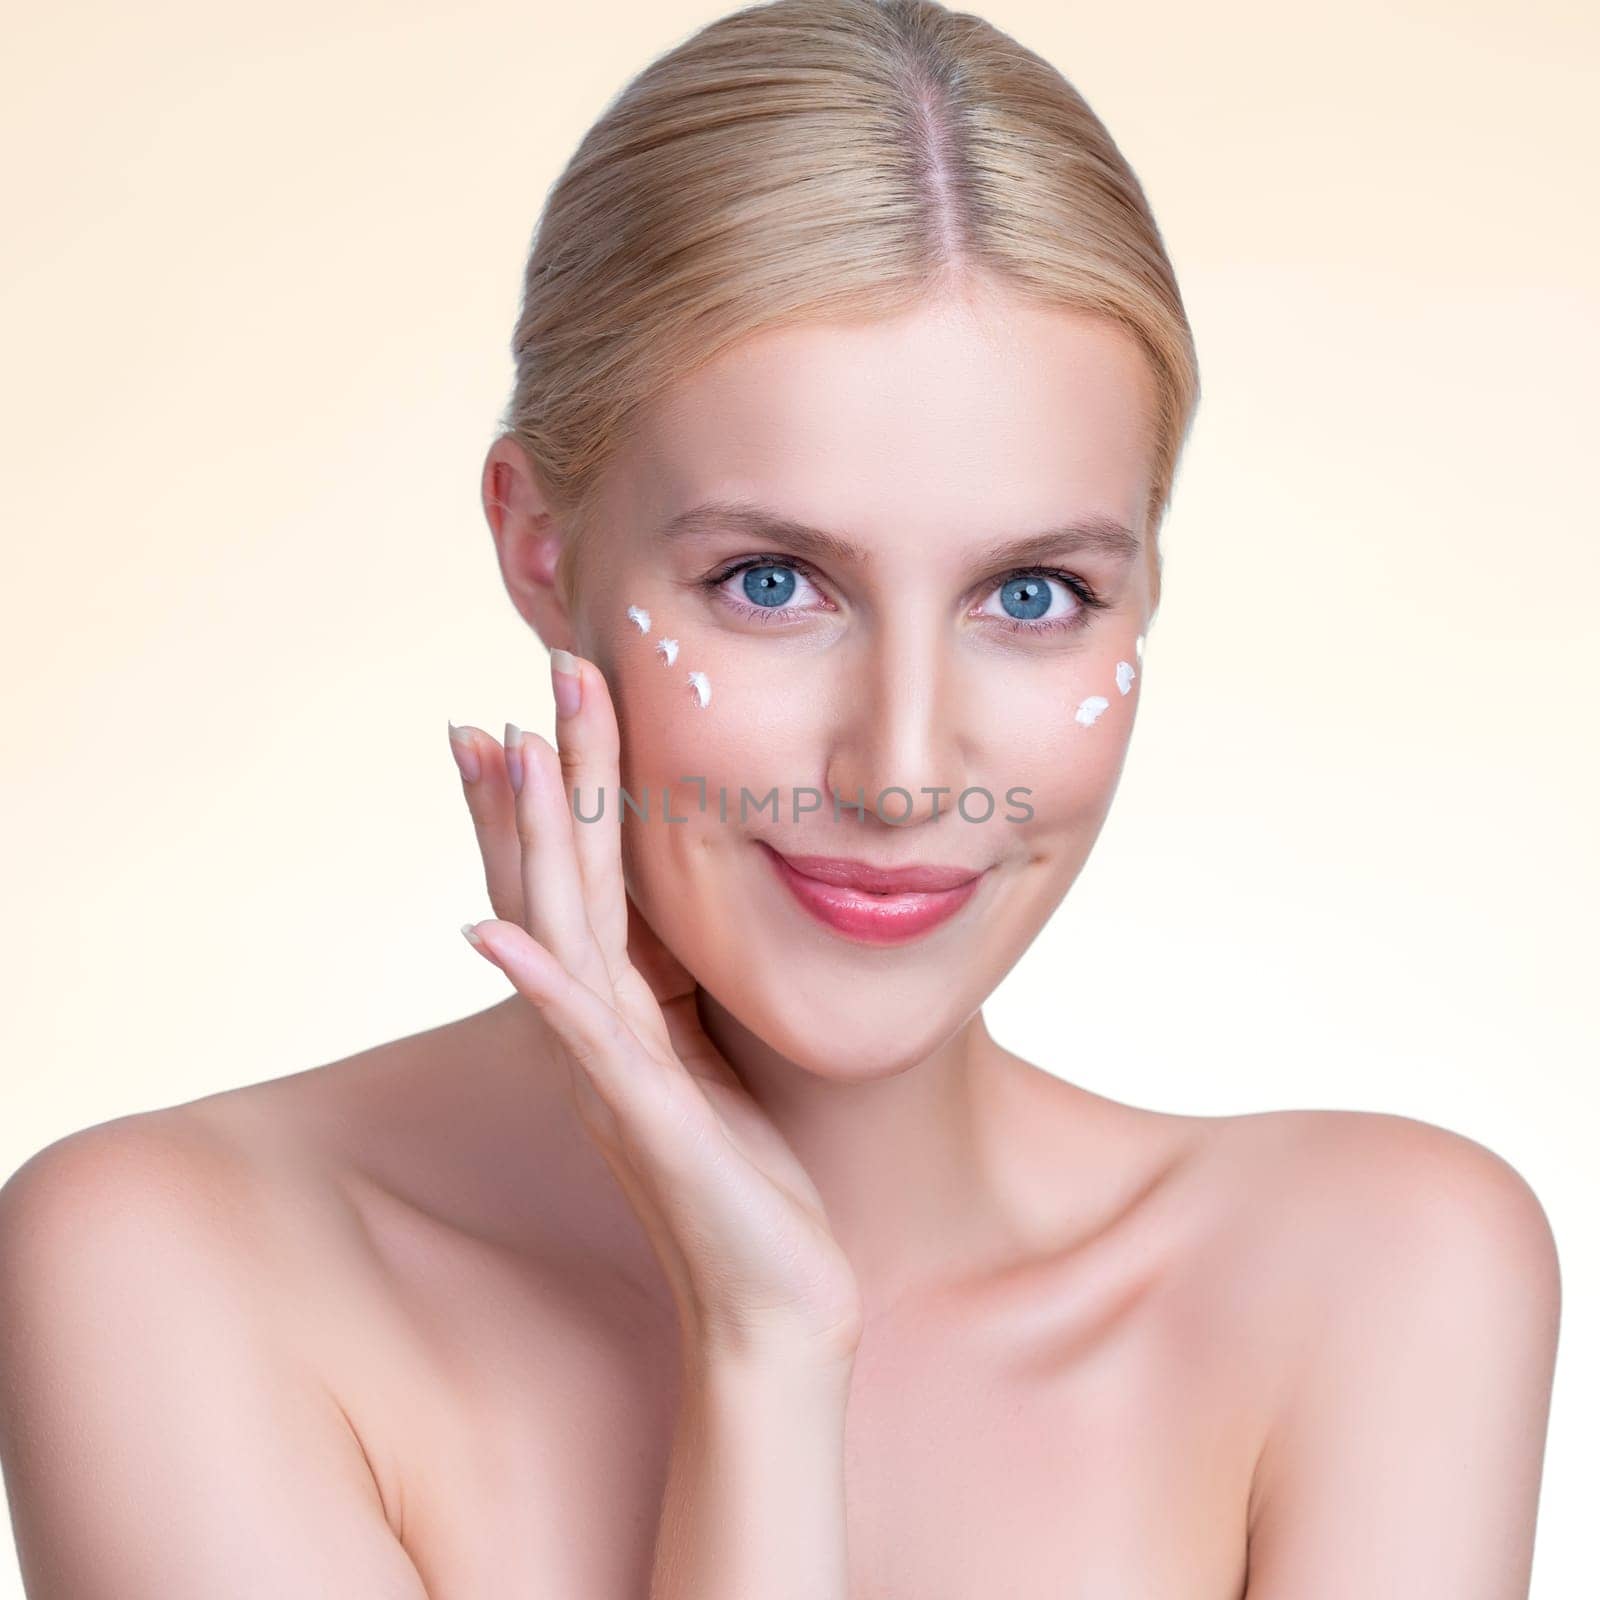 Personable beautiful perfect clean skin soft makeup woman finger applying moisturizer cream on her face under contour eye for anti aging wrinkle. Facial skin rejuvenation in isolated background.